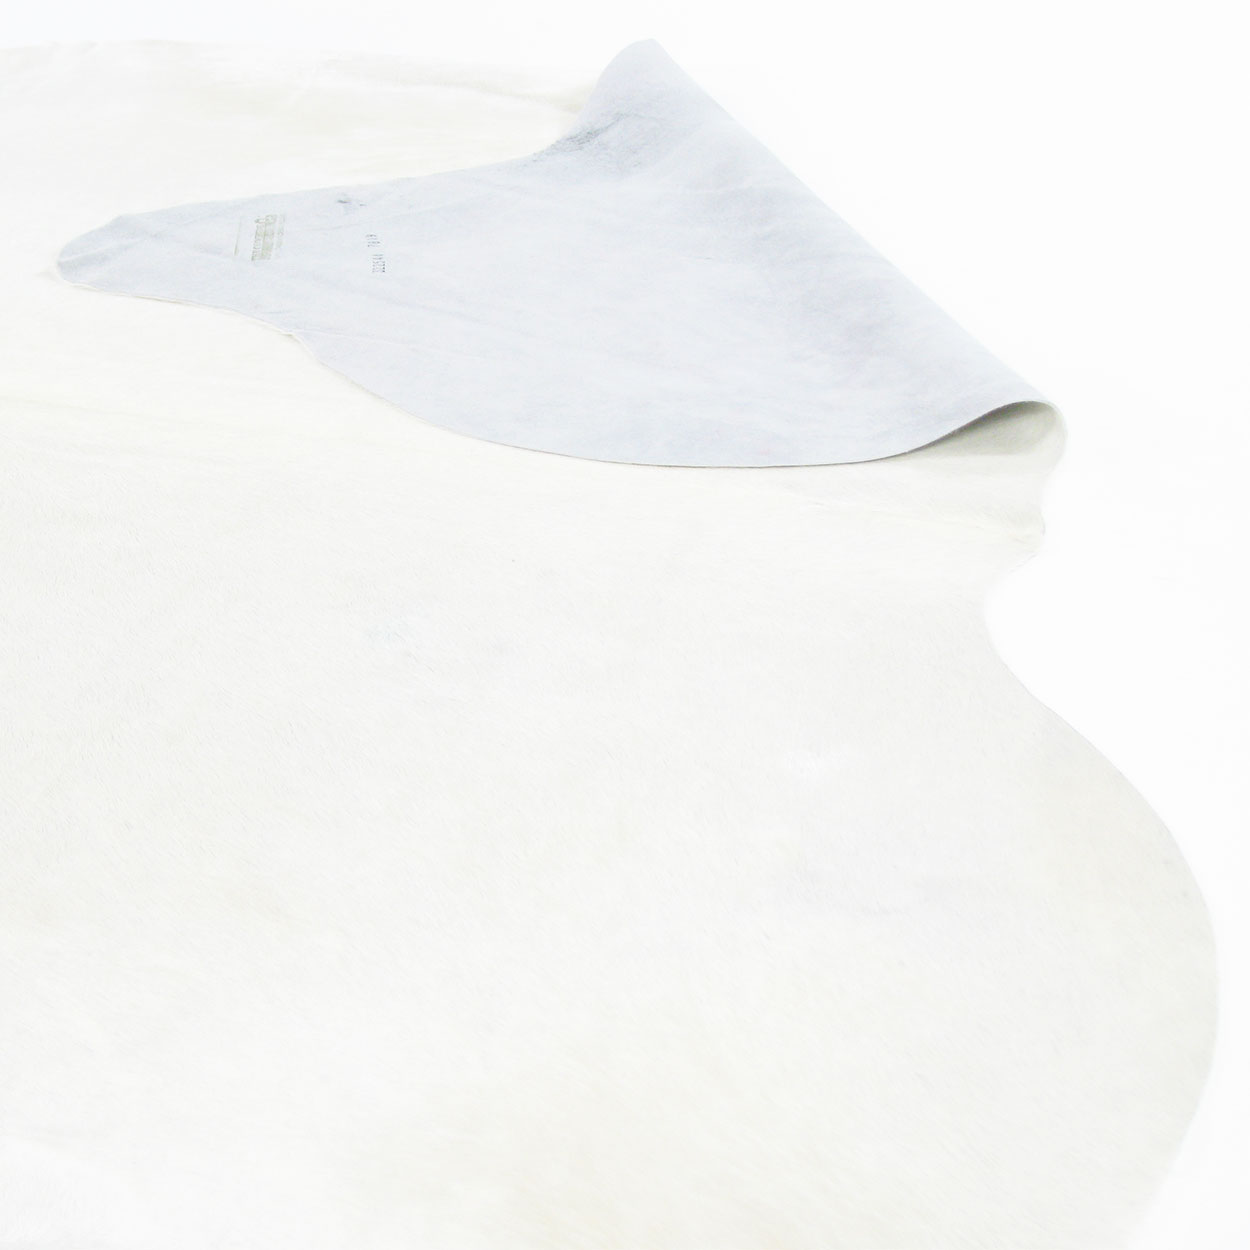 322514 - Premium Grade A Natural Solid Off White Cowhide